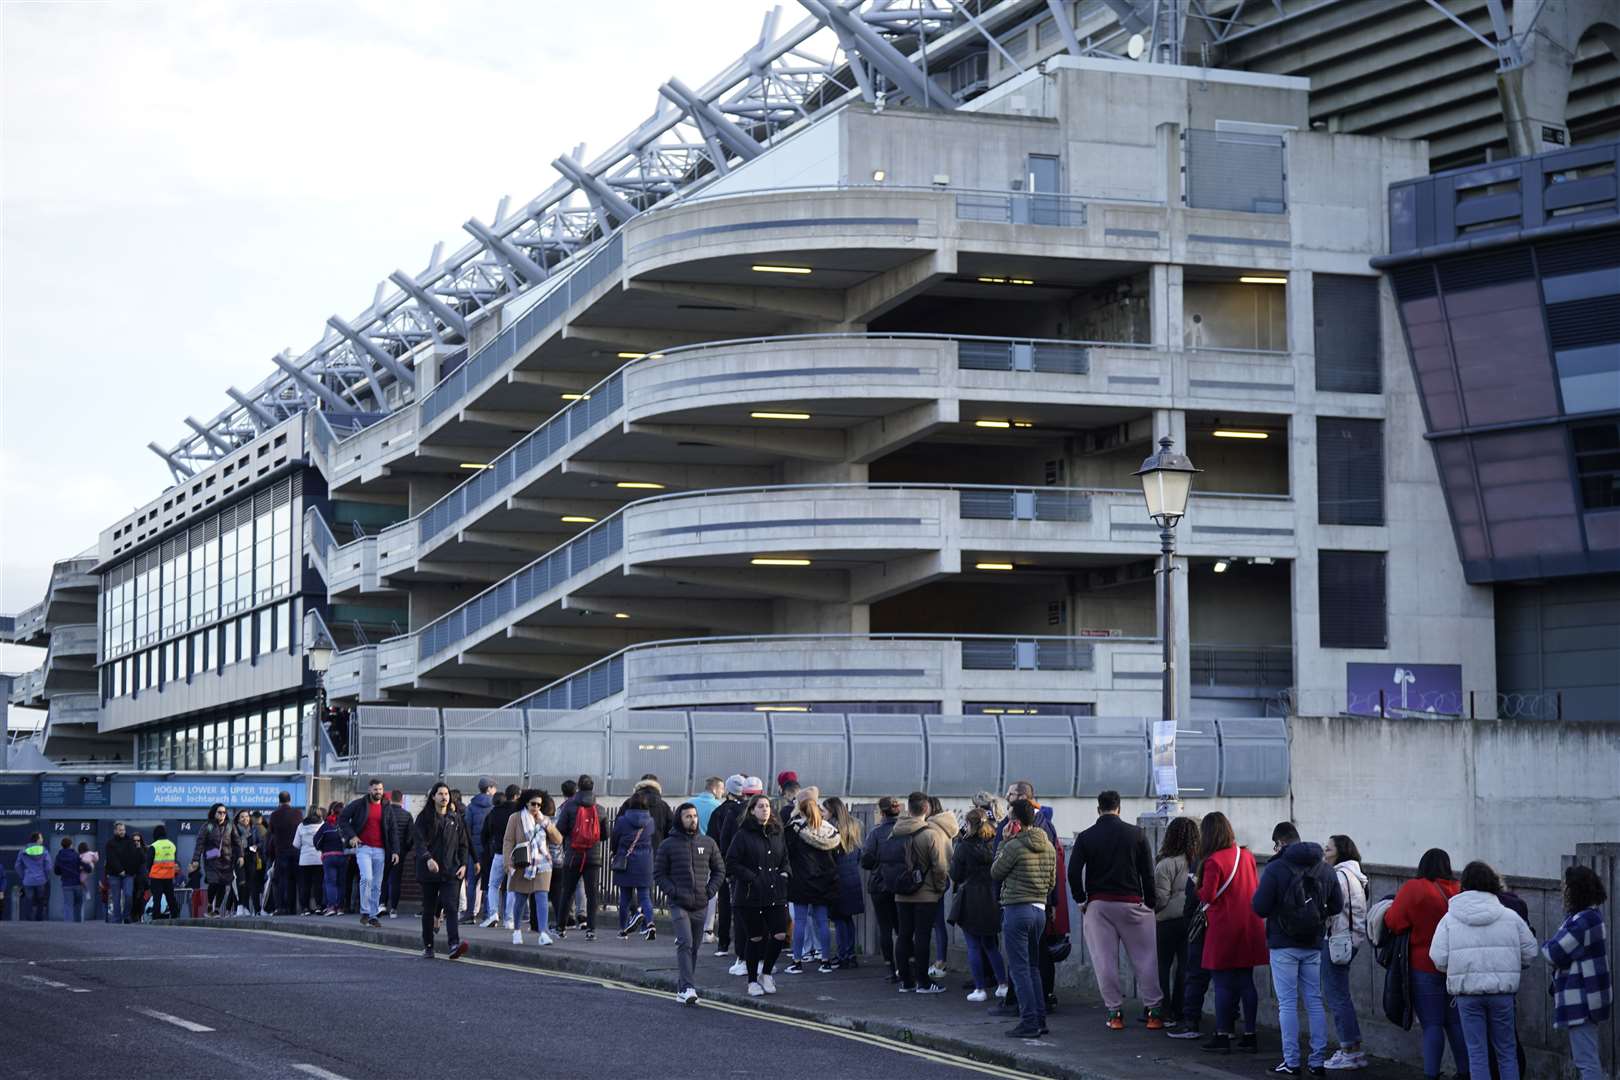 Brazilians from all over Ireland queue to vote at Croke Park in Dublin (Niall Carson/PA)